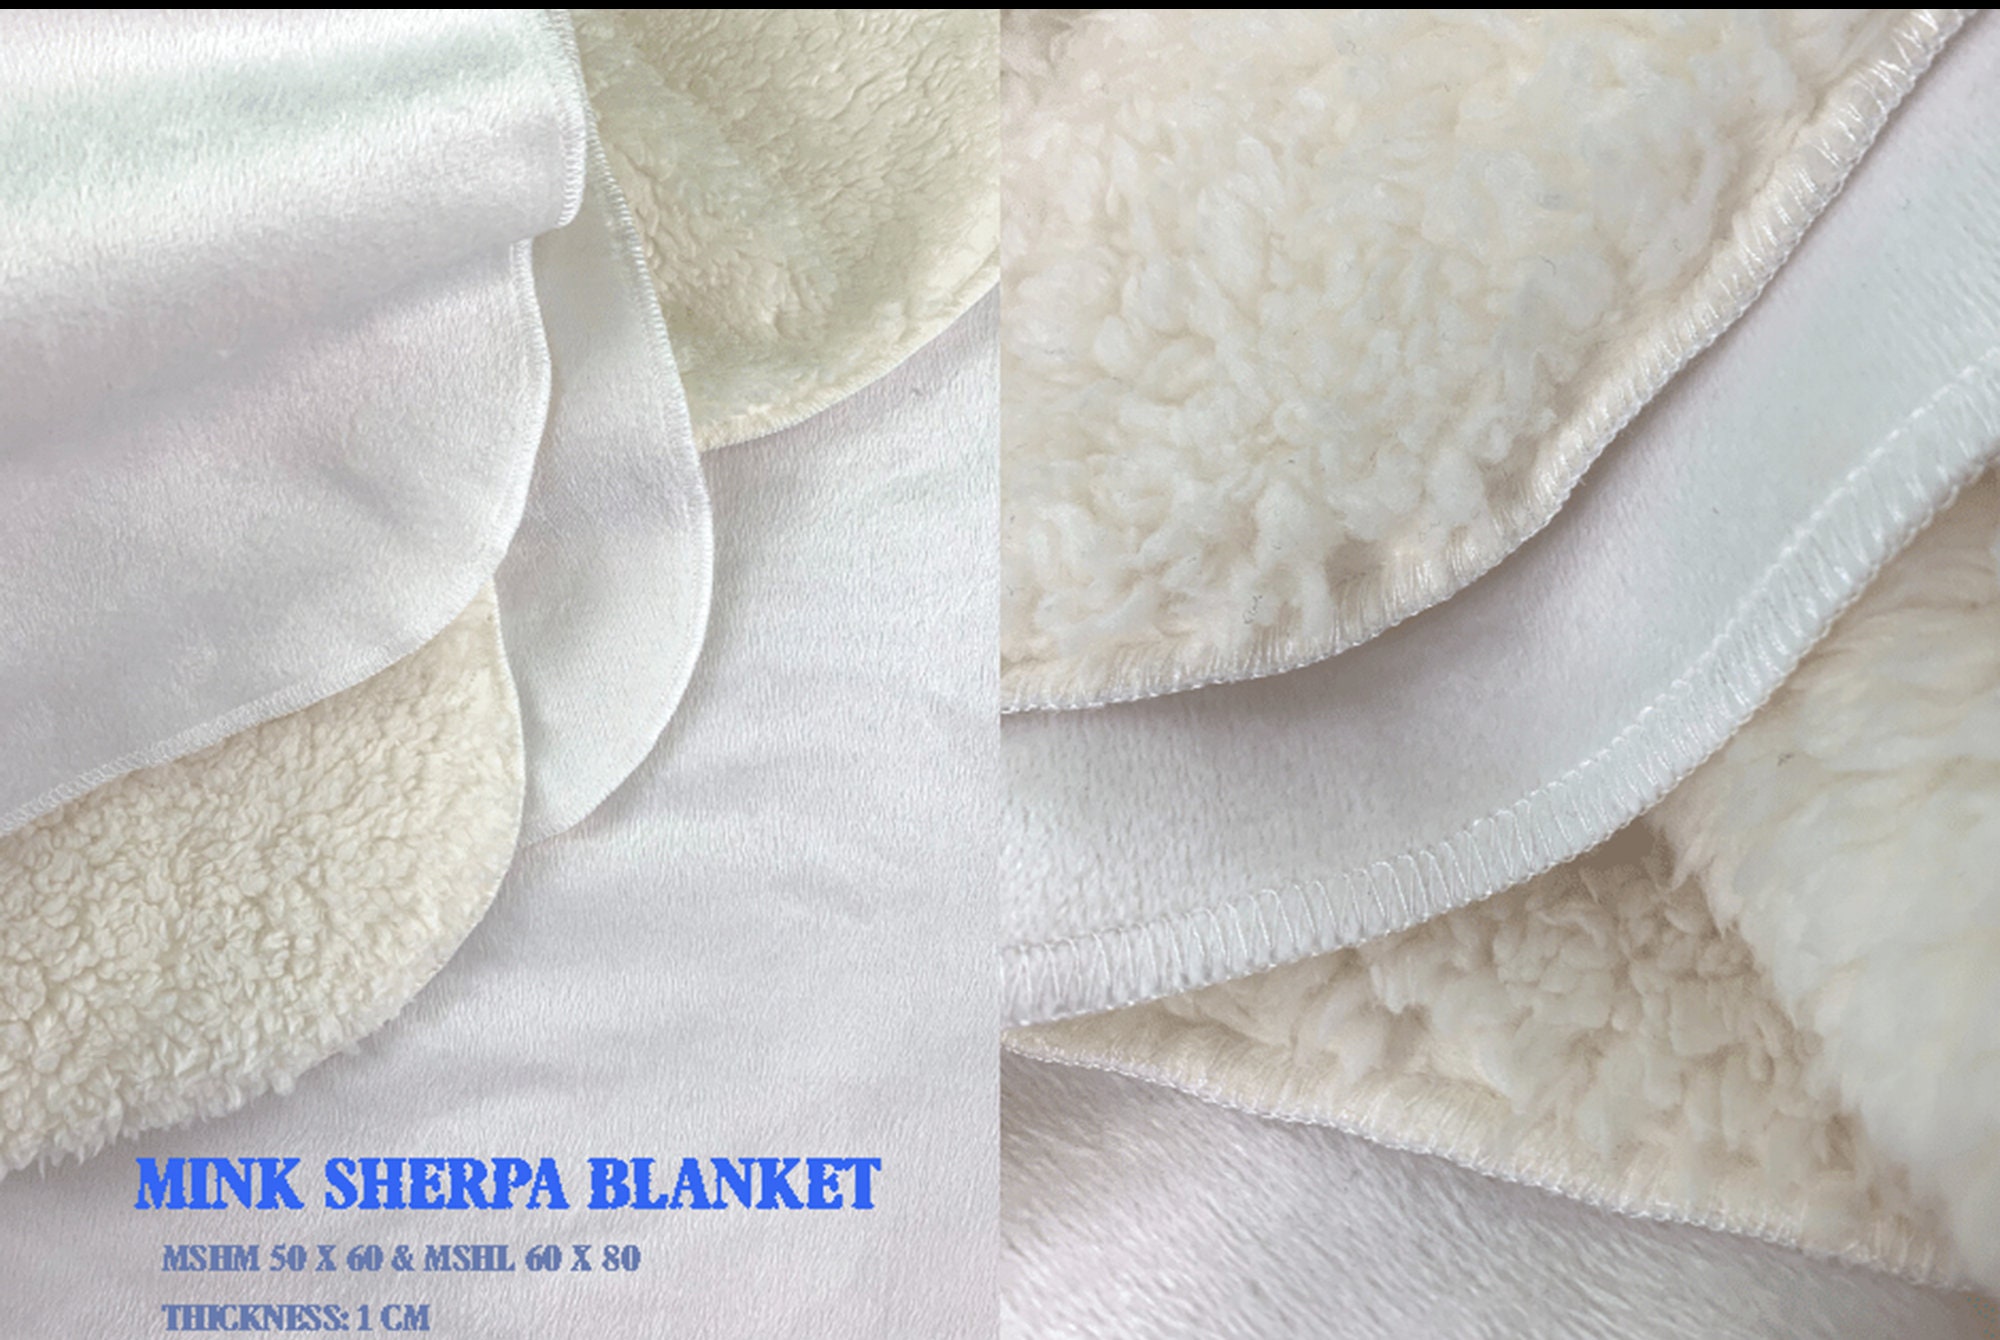 Discover To My Amazing Son Blanket, Custom Name Blanket, Custom Hair Color Blanket, Family Blanket, Mother's Gift Blanket